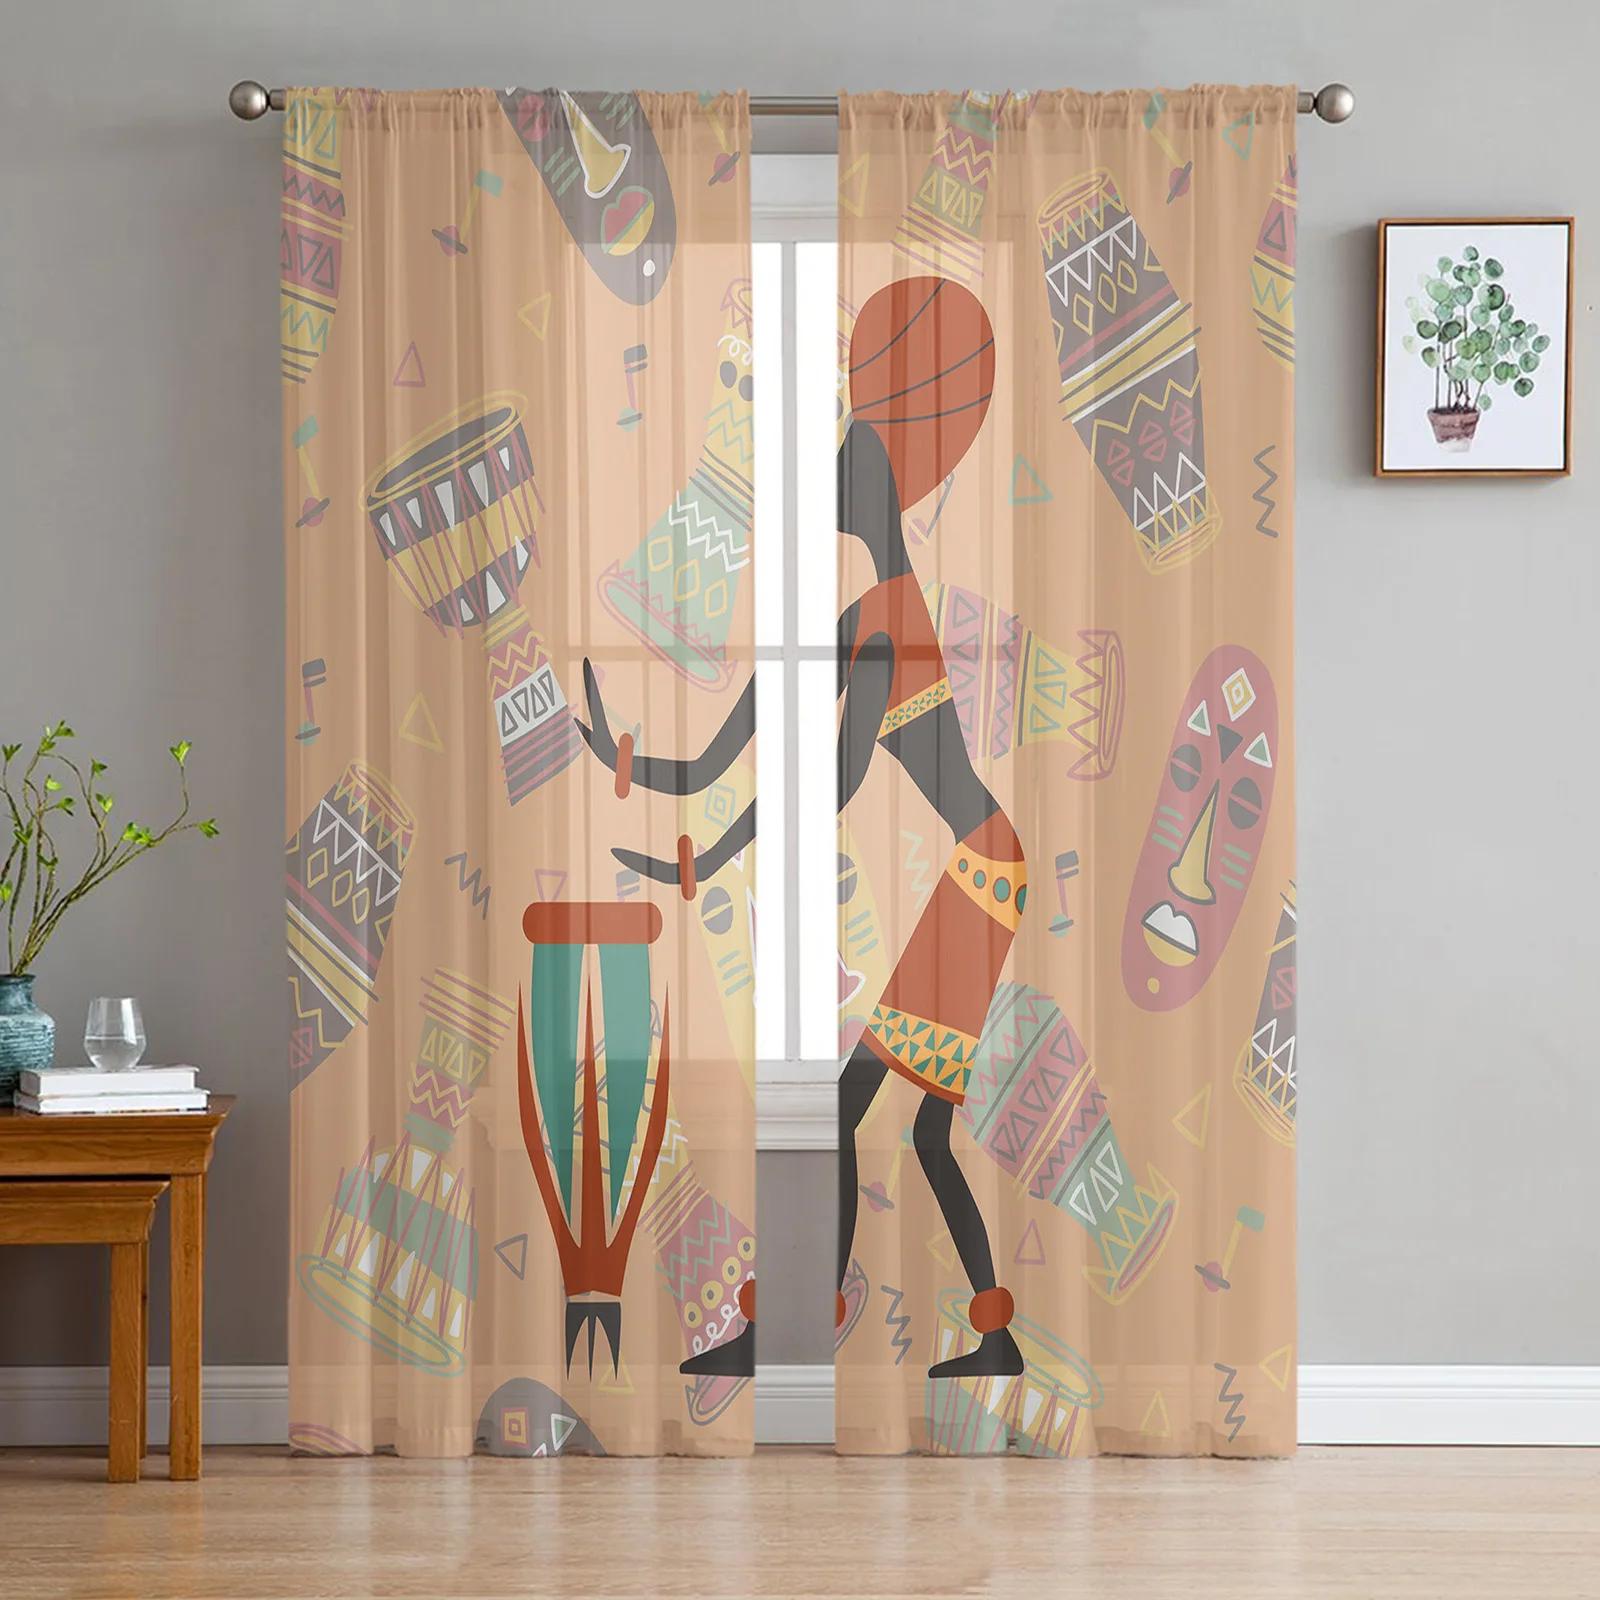 African Woman Tambourine Tulle Curtains for Living Room Bedroom Sheer Voile Drapes Modern Printed Design Sheer Curta